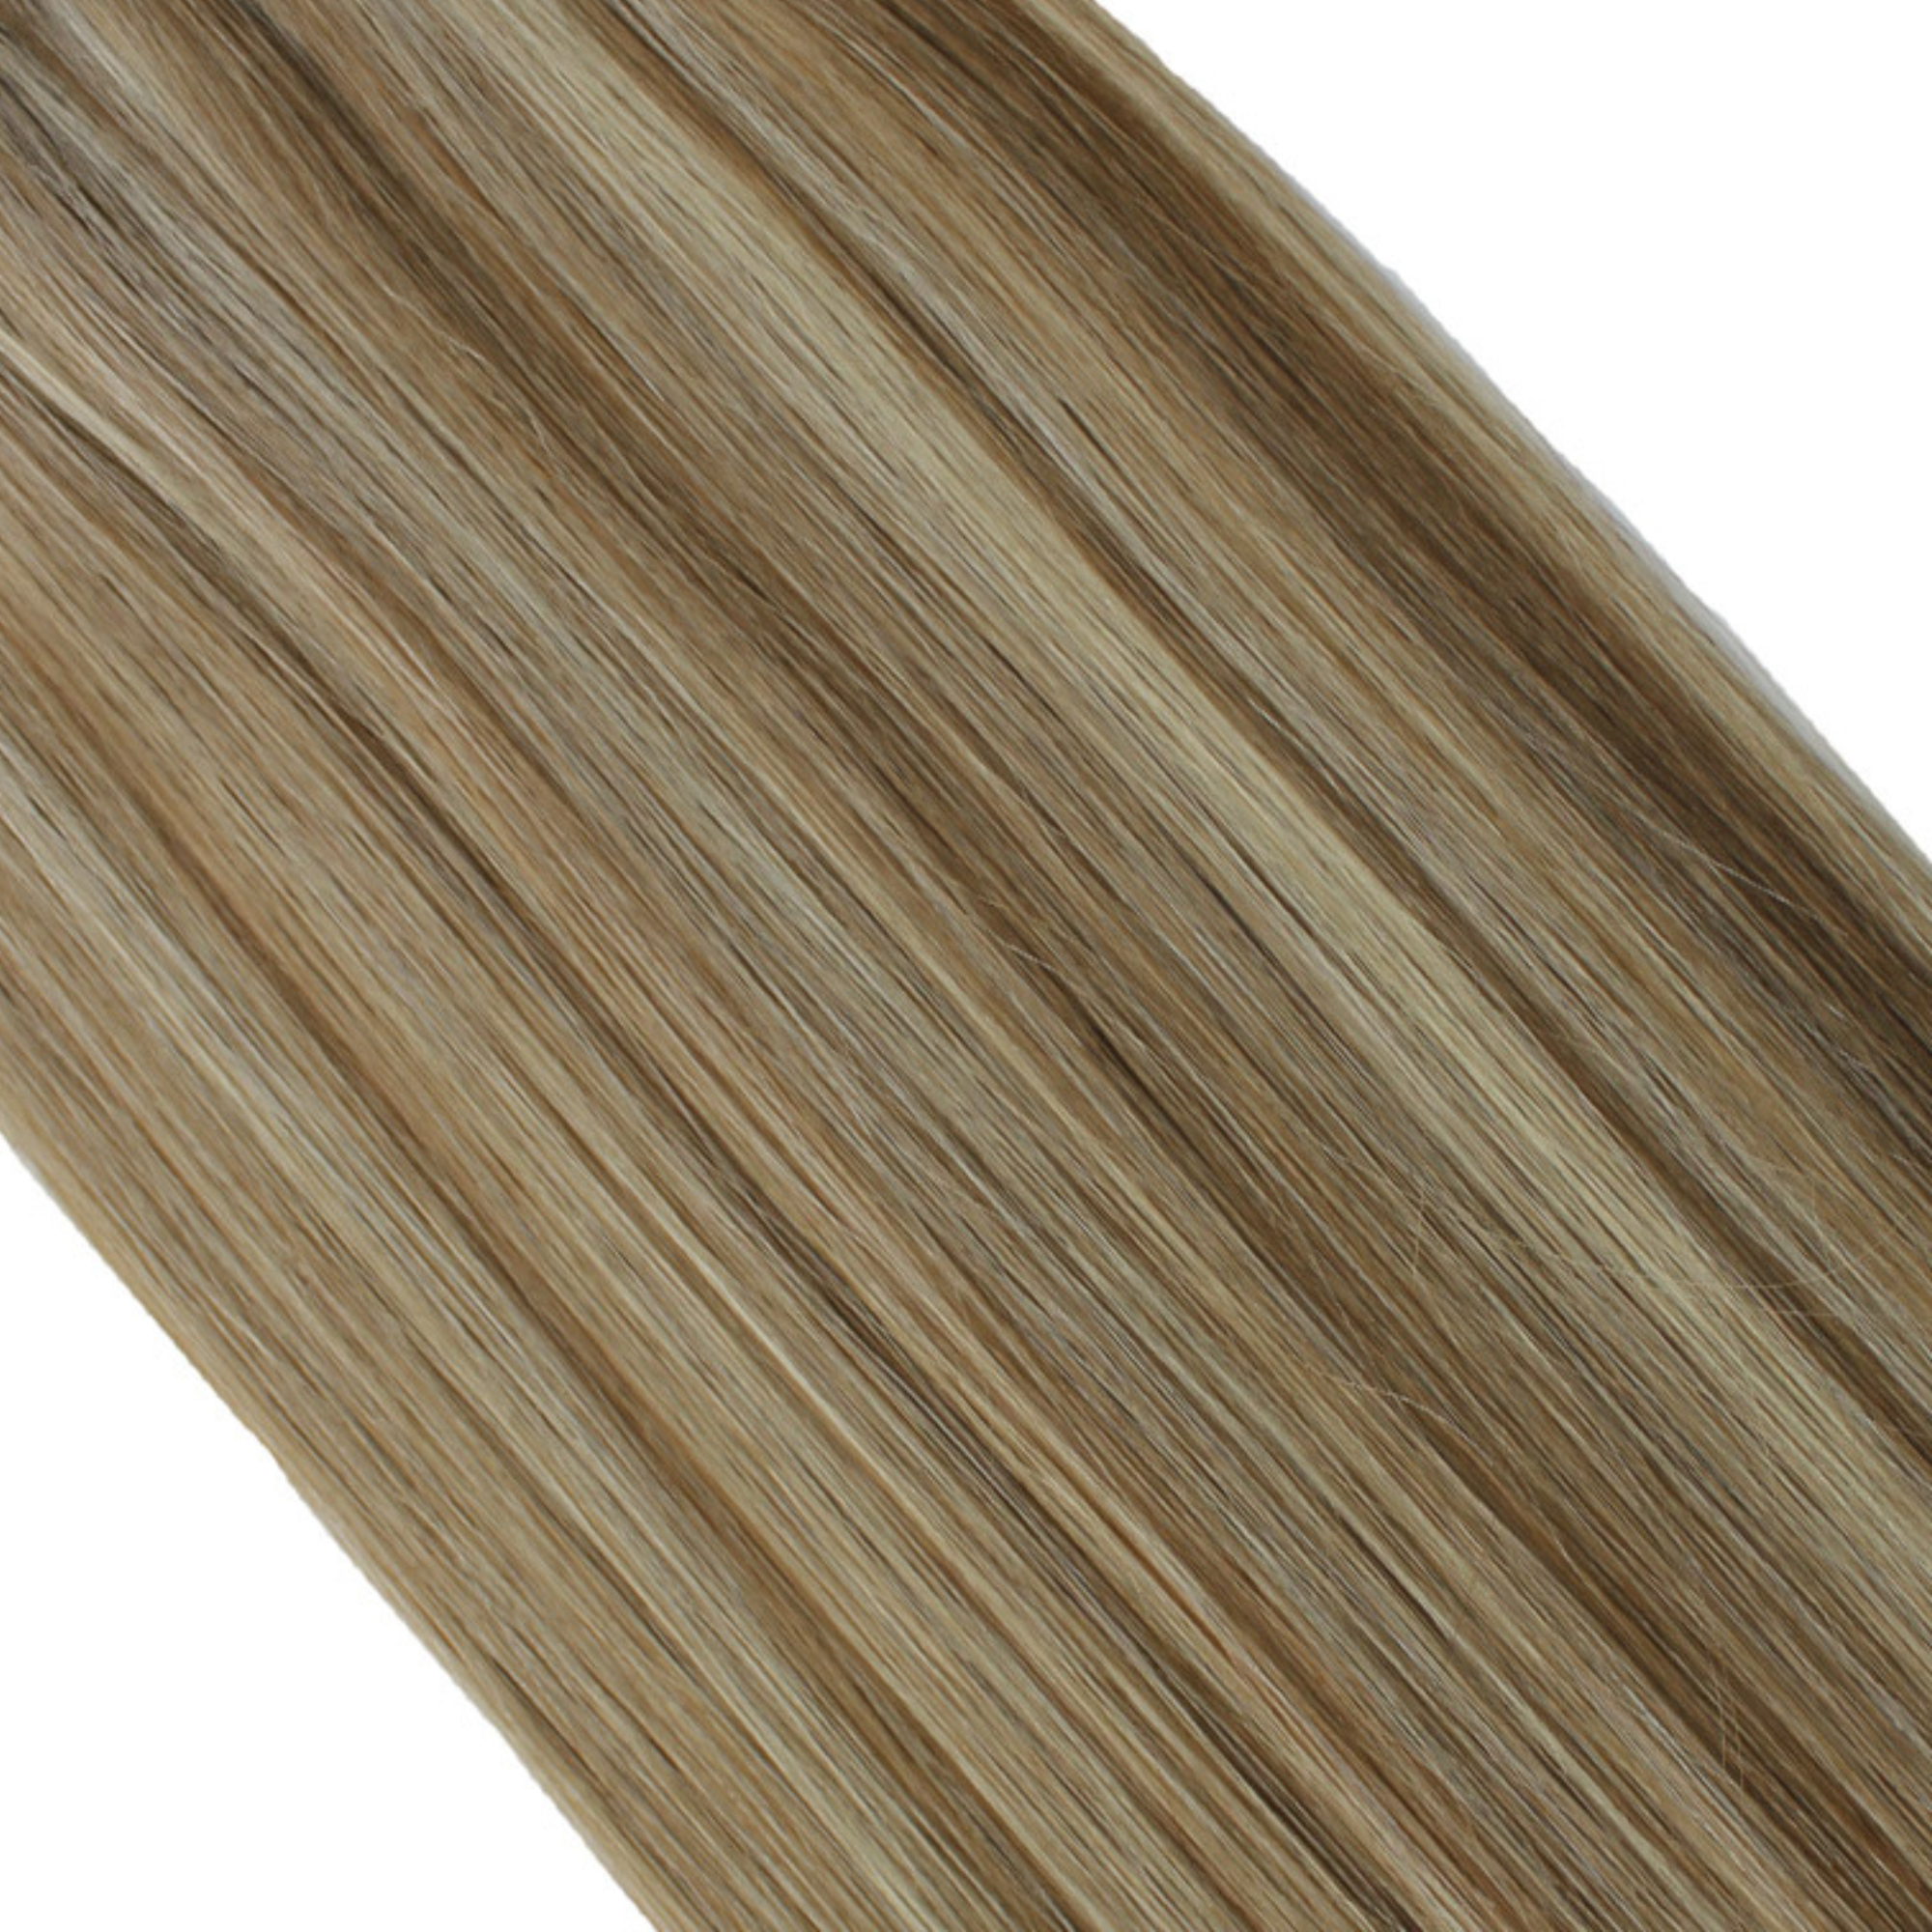 "hair rehab london 22" tape hair extensions shade swatch titled supermodel style"